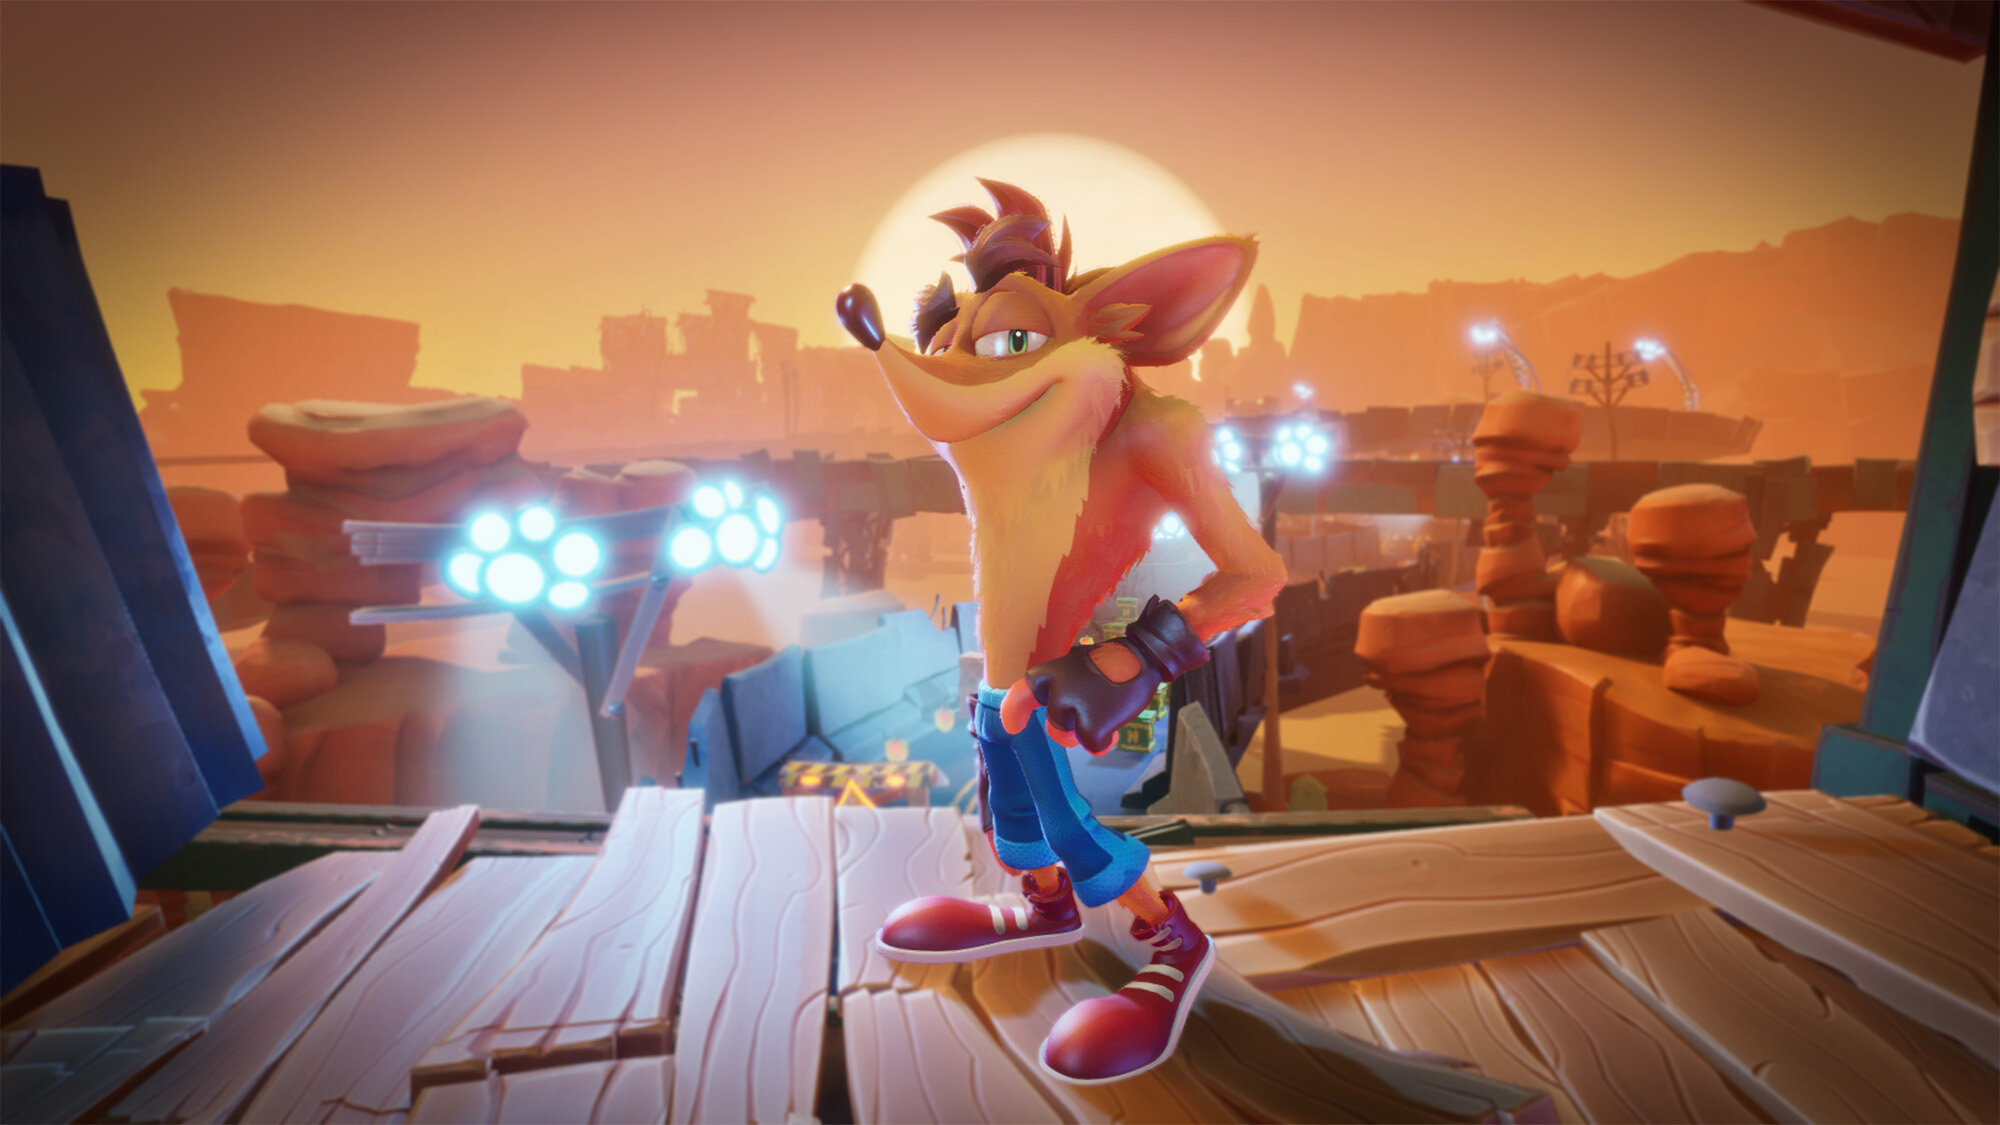 Crash Bandicoot 4: It's About Time (PS4) Review - Modern And Retro